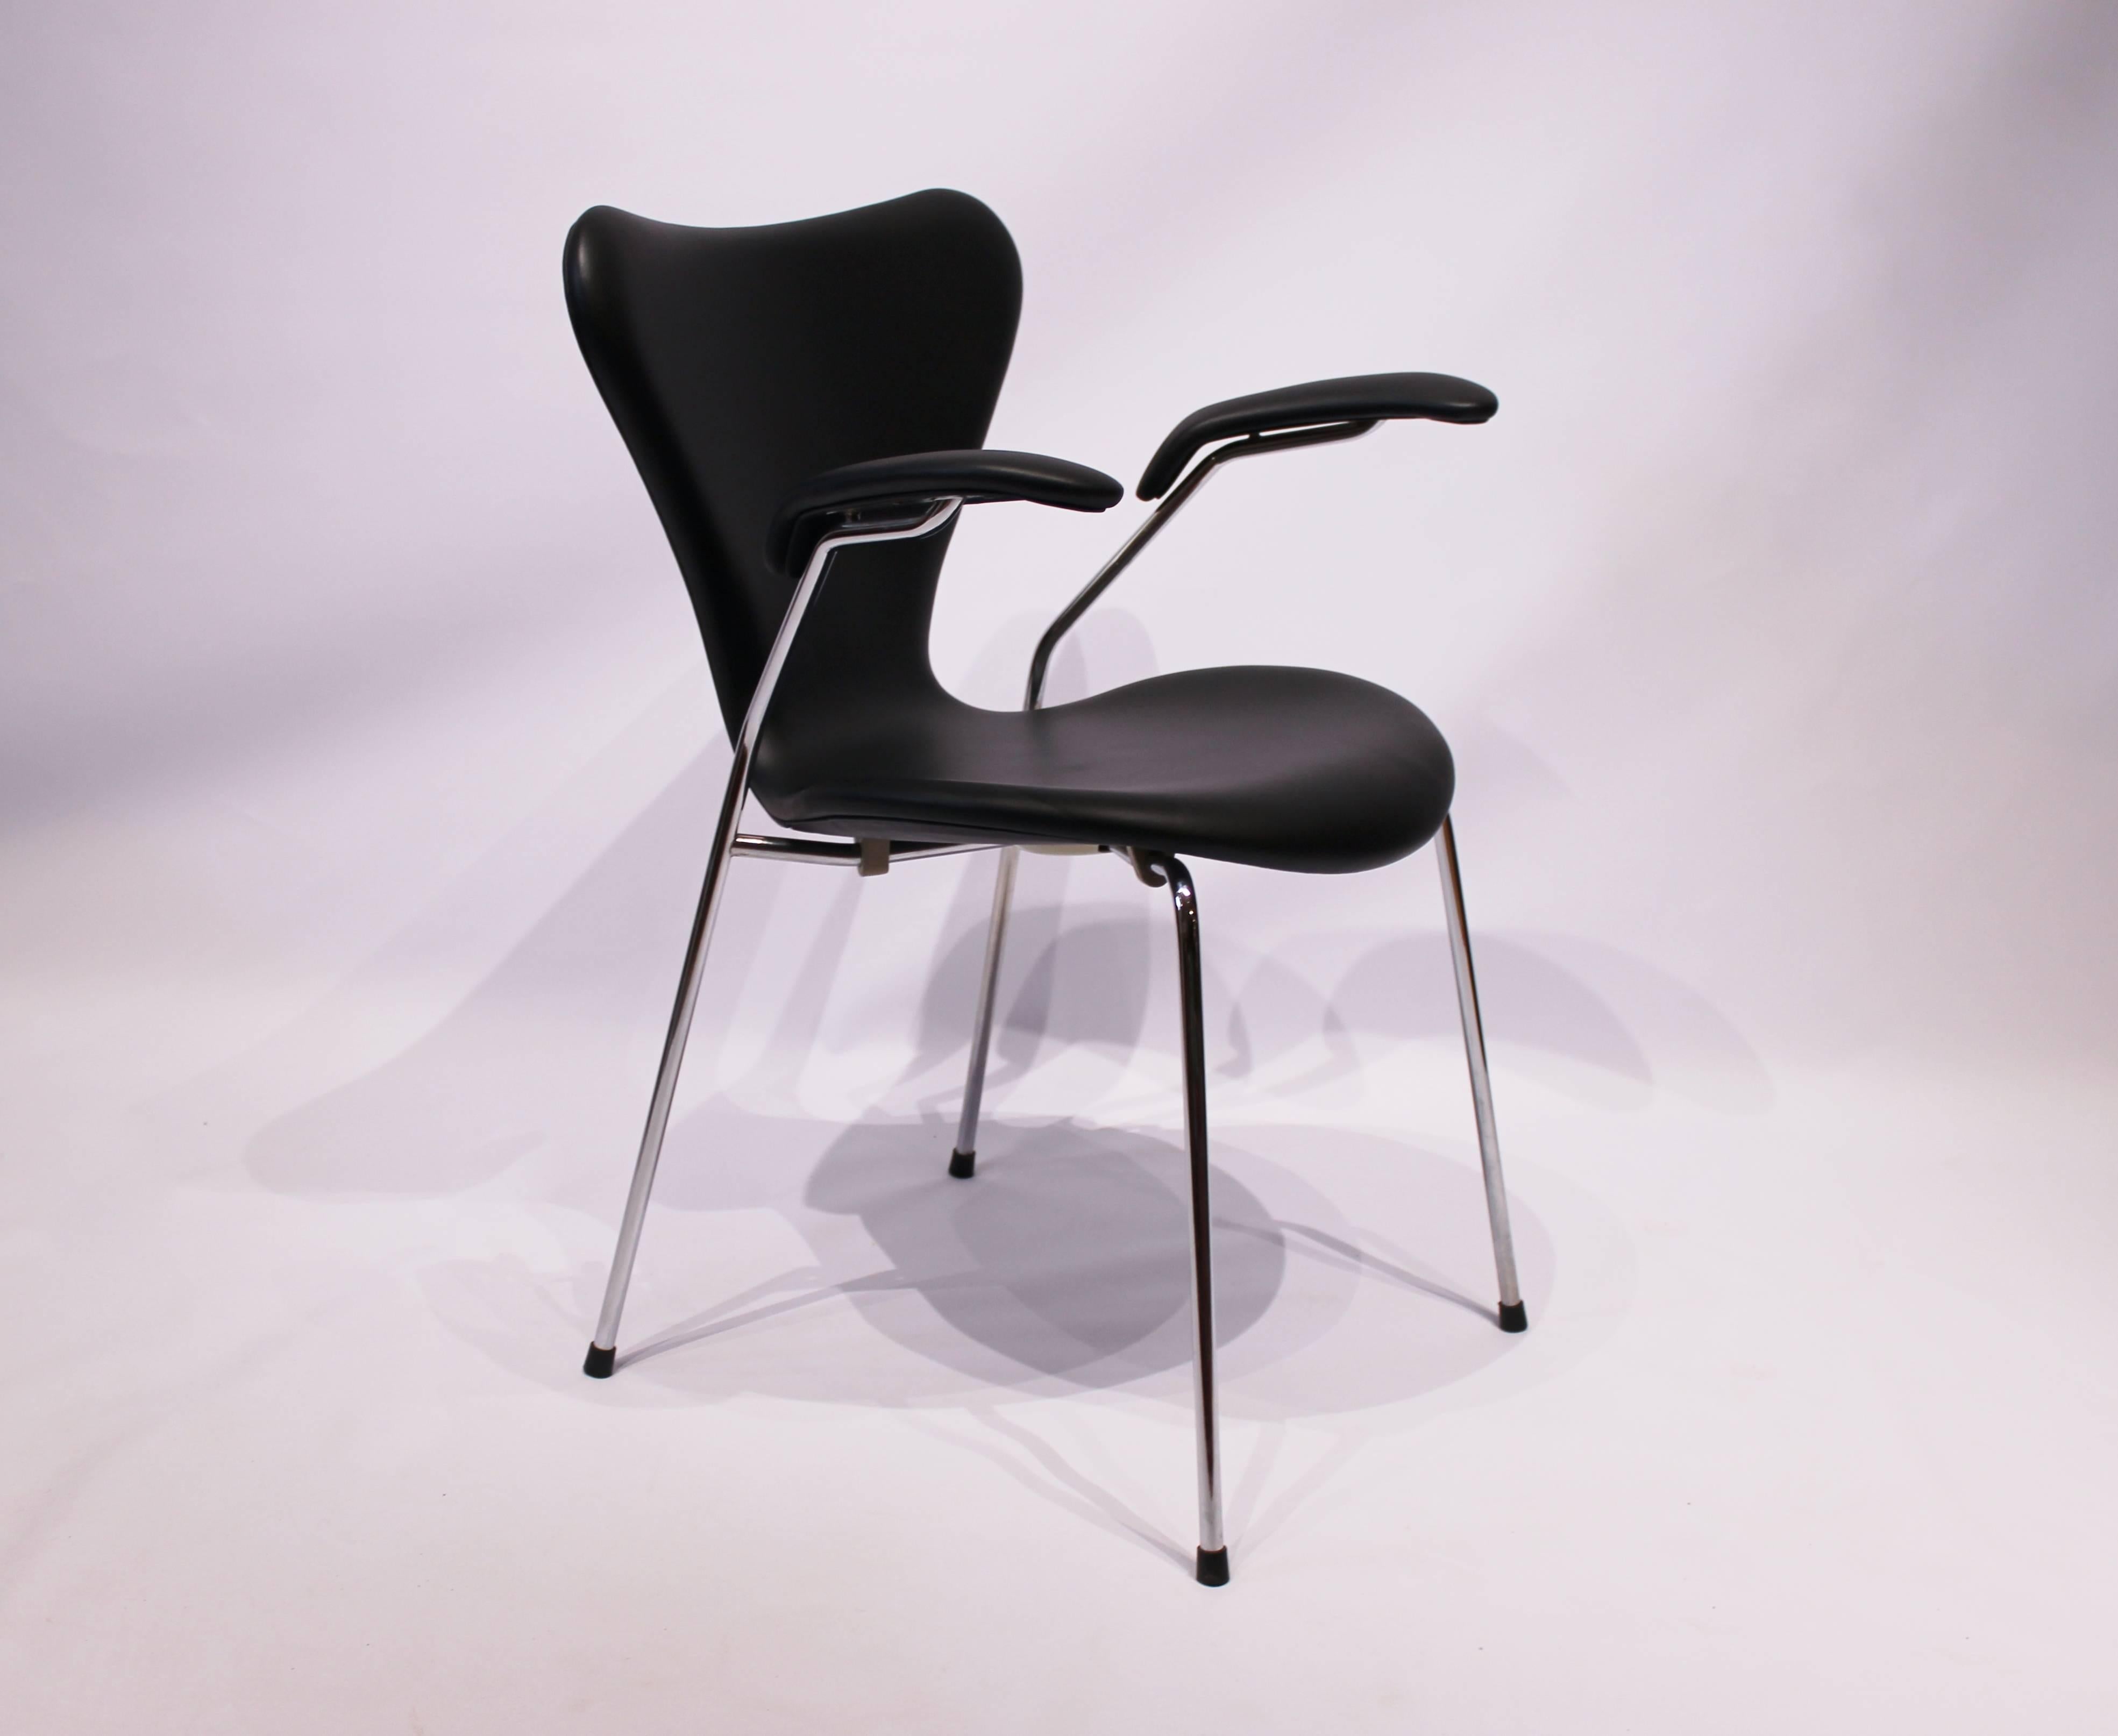 The Seven chair, model 3207, designed by Arne Jacobsen in 1955 and manufactured by Fritz Hansen in the 1980s, is a true icon of mid-century modern design that continues to be celebrated for its timeless elegance and versatility.

Arne Jacobsen was a